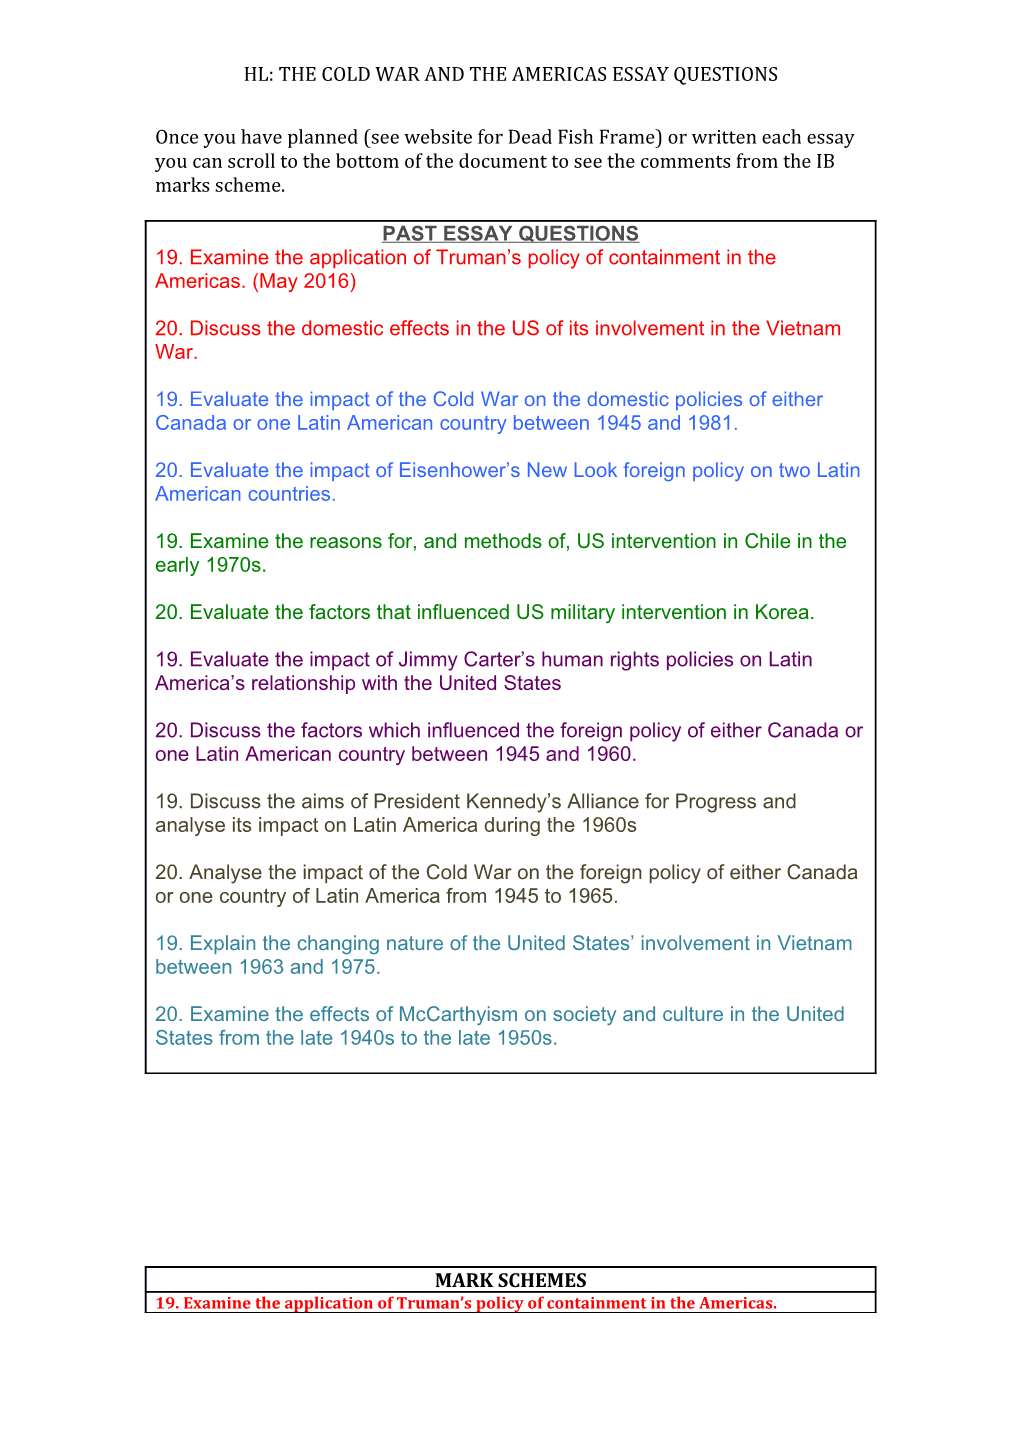 Hl: the Cold War and the Americas Essay Mark Schemes s1